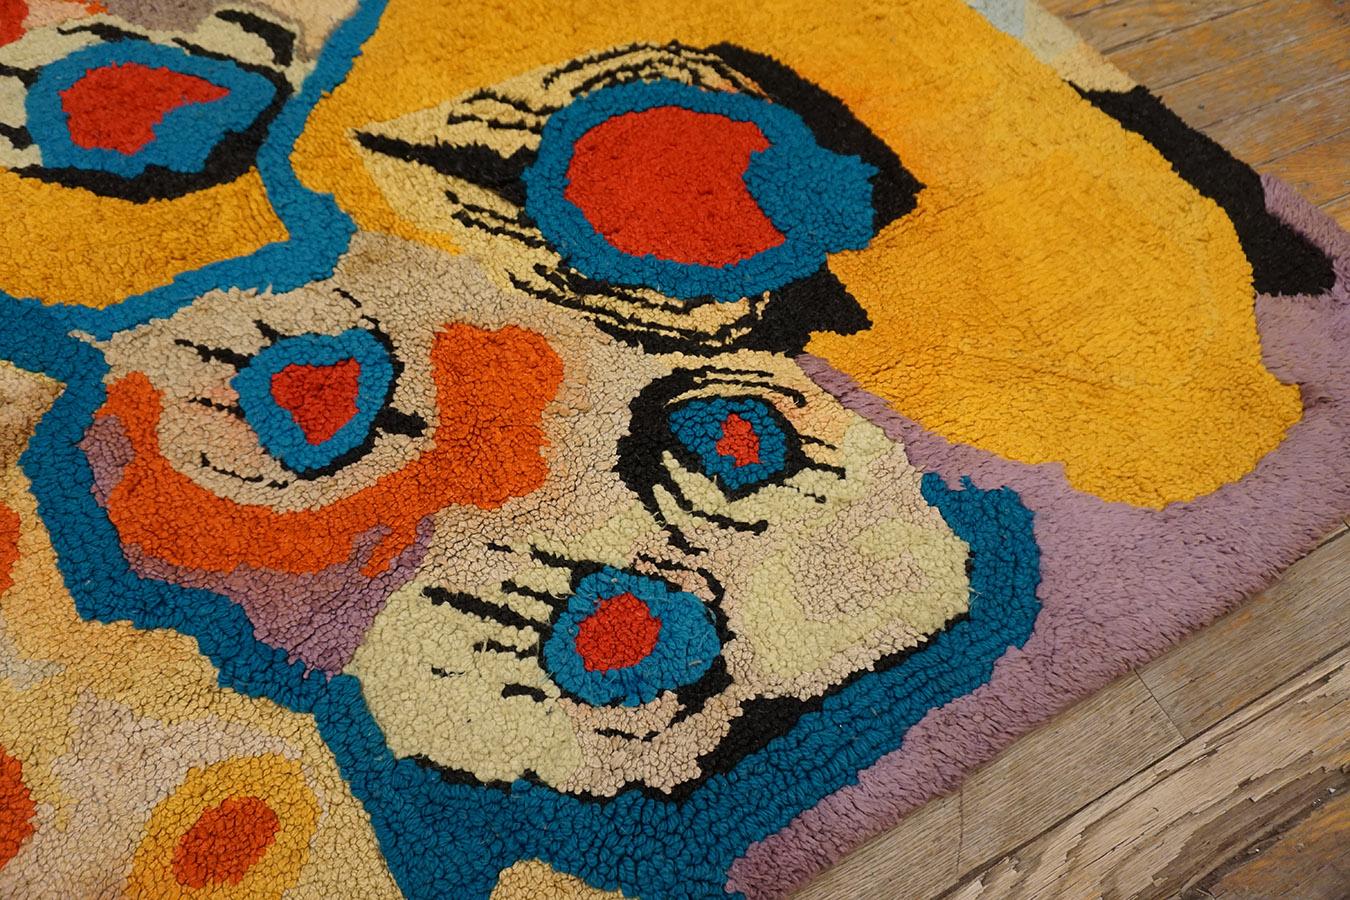 Hand-Woven Vintage 1970s American Hooked Rug ( 4' x 4'7